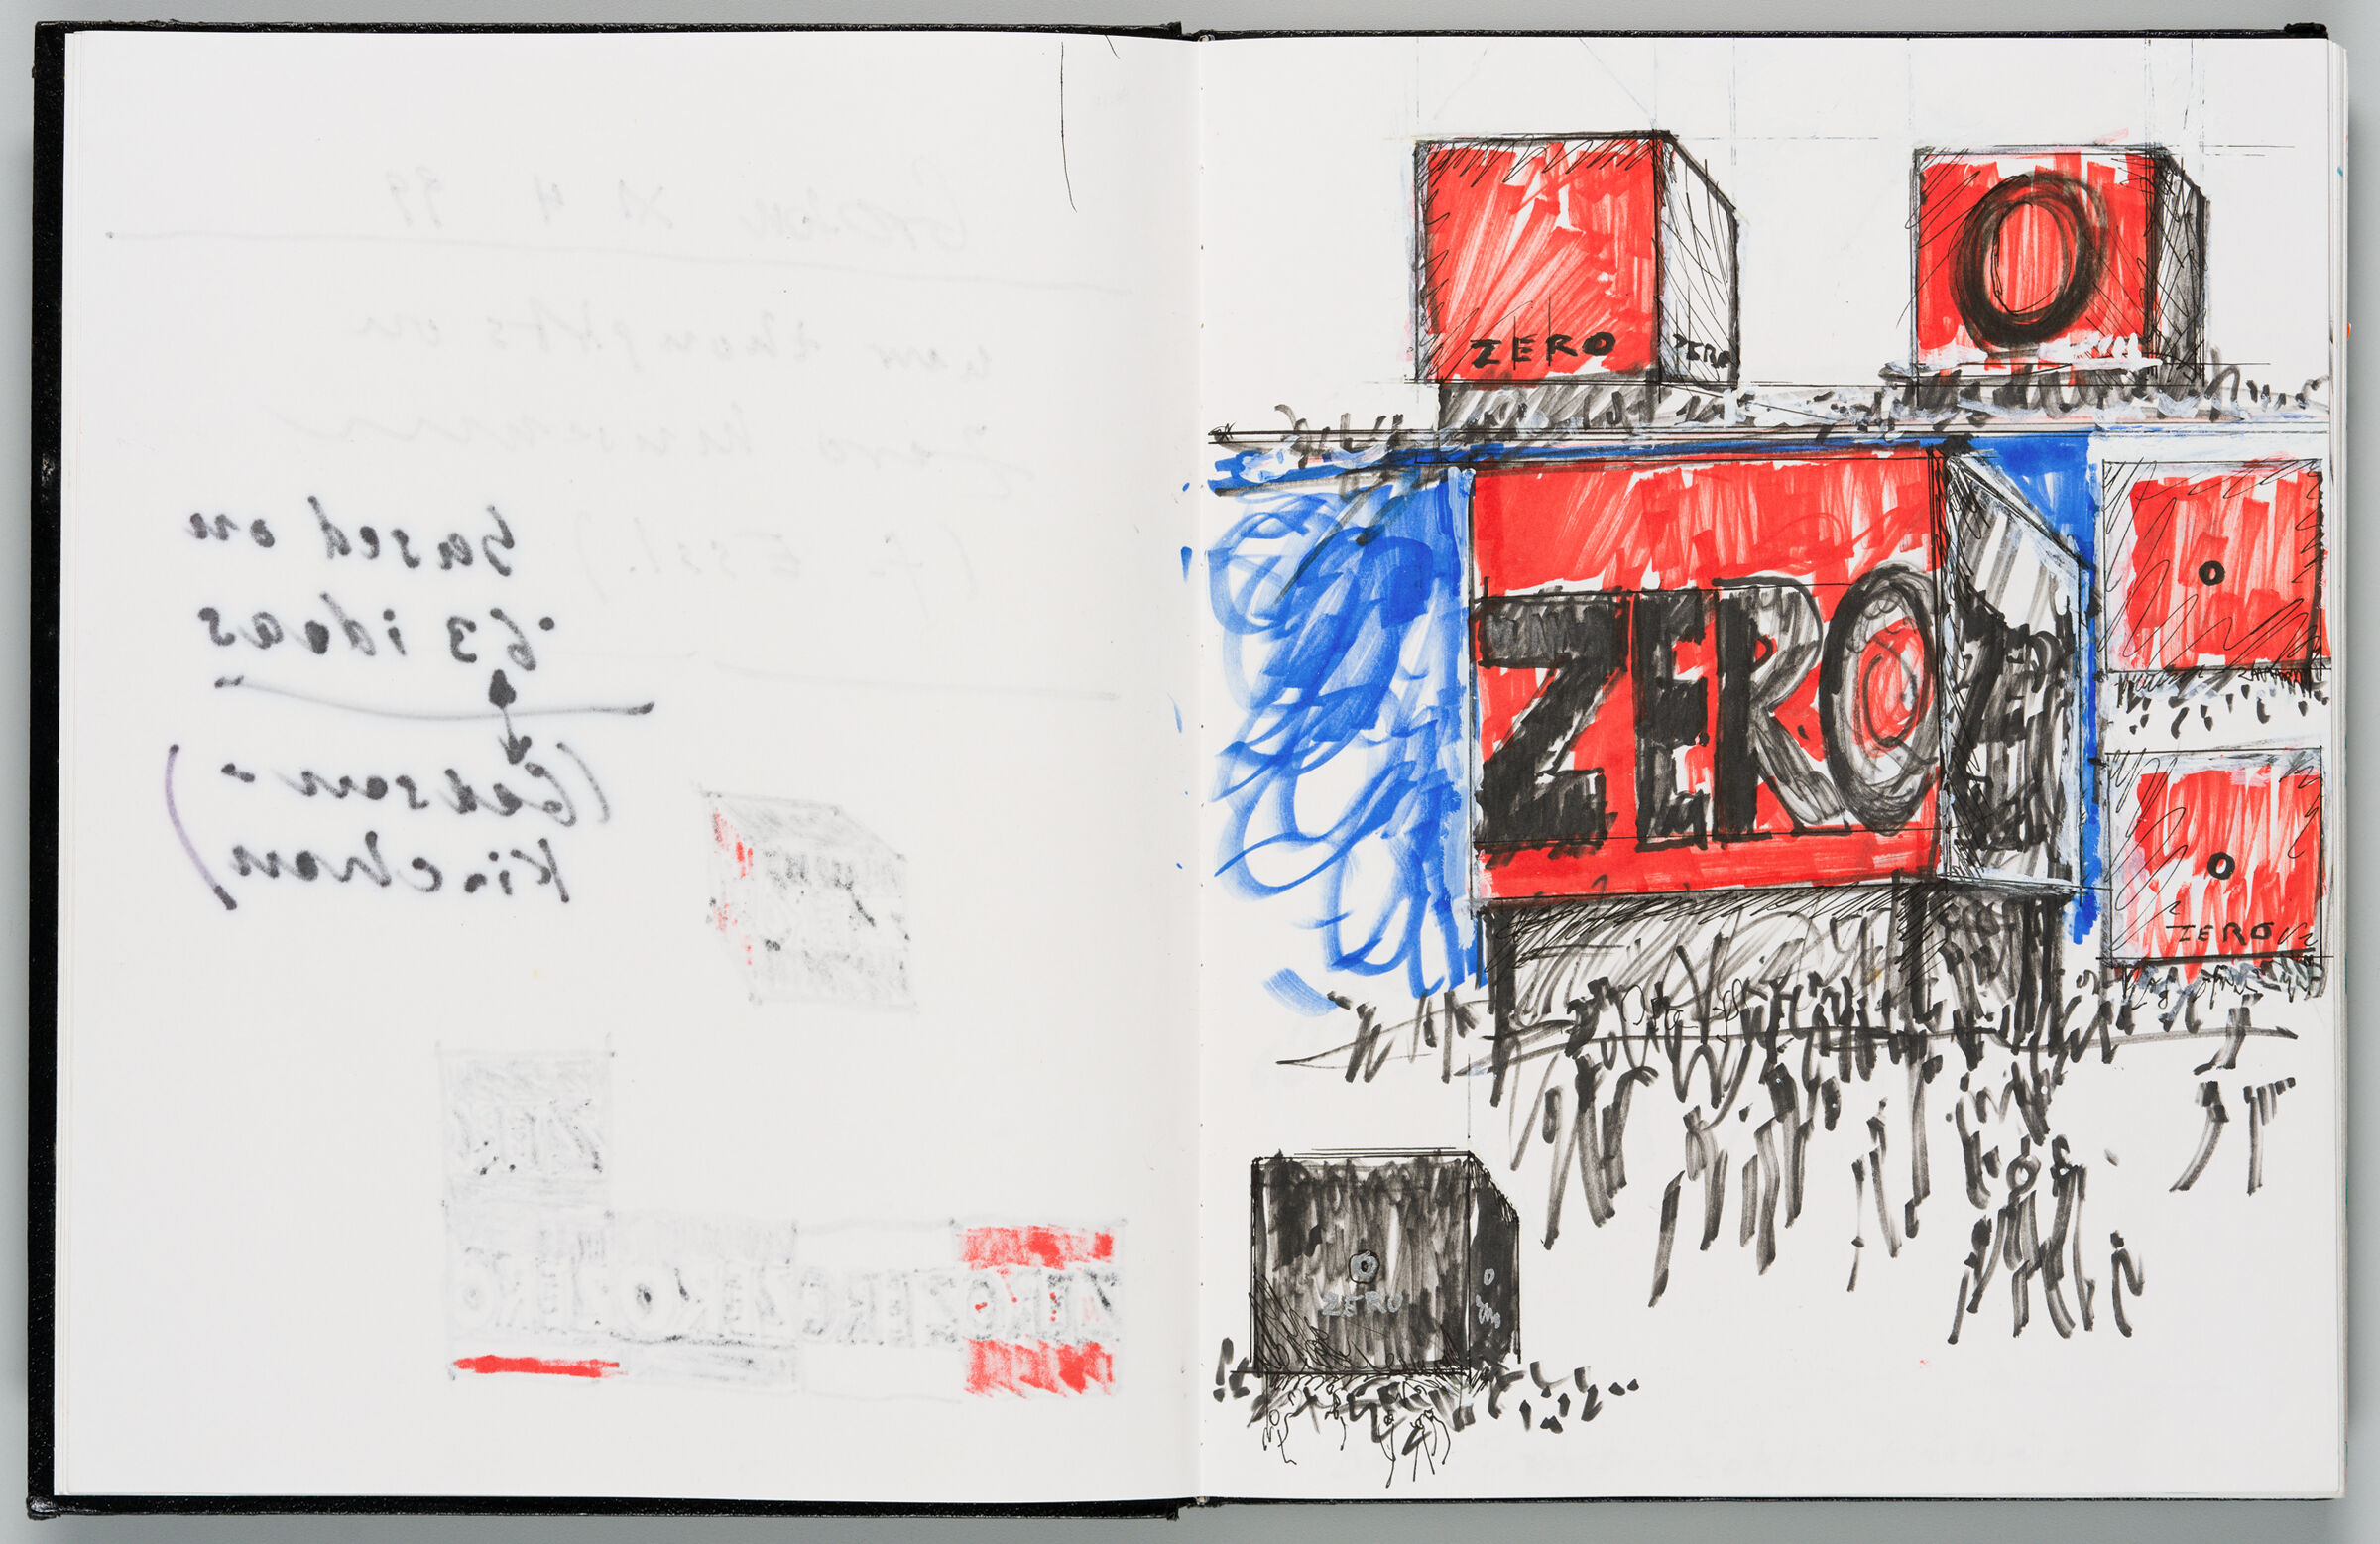 Untitled (Bleed-Through Of Previous Page, Left Page); Untitled (Designs For Zero Museum, Right Page)